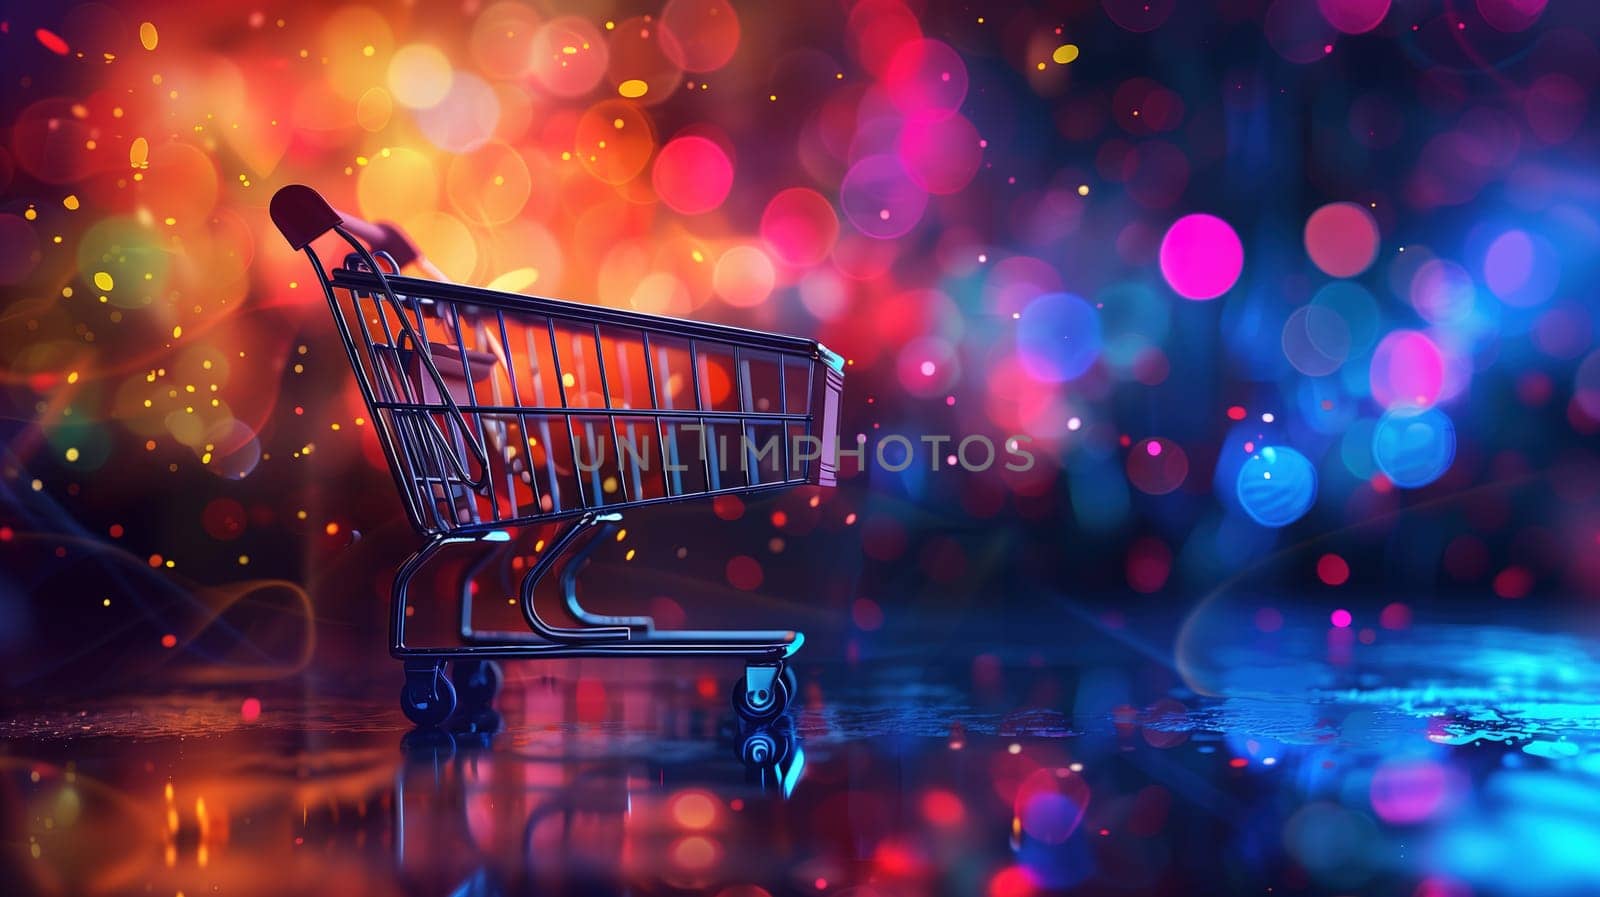 Shopping Cart on Wet Floor by TRMK